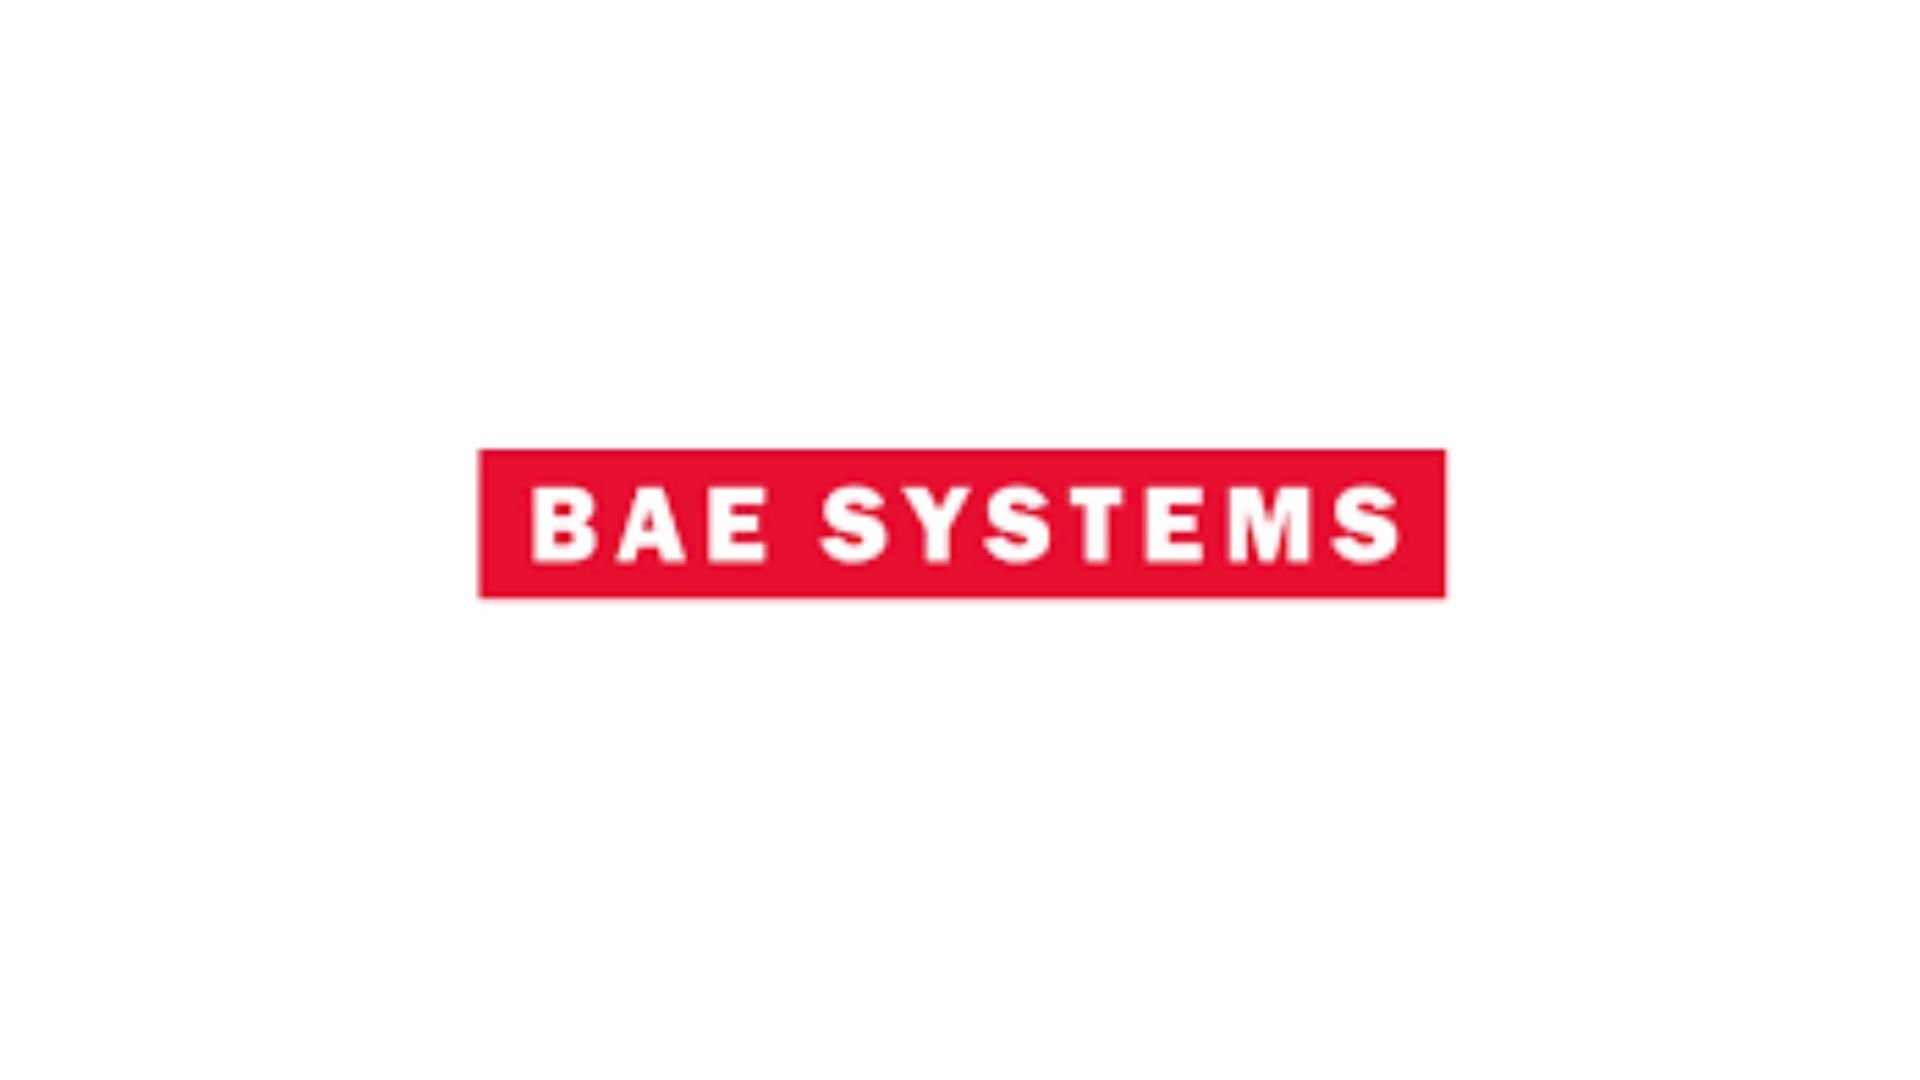 CLS Service Works with the Bae Systems.jpg